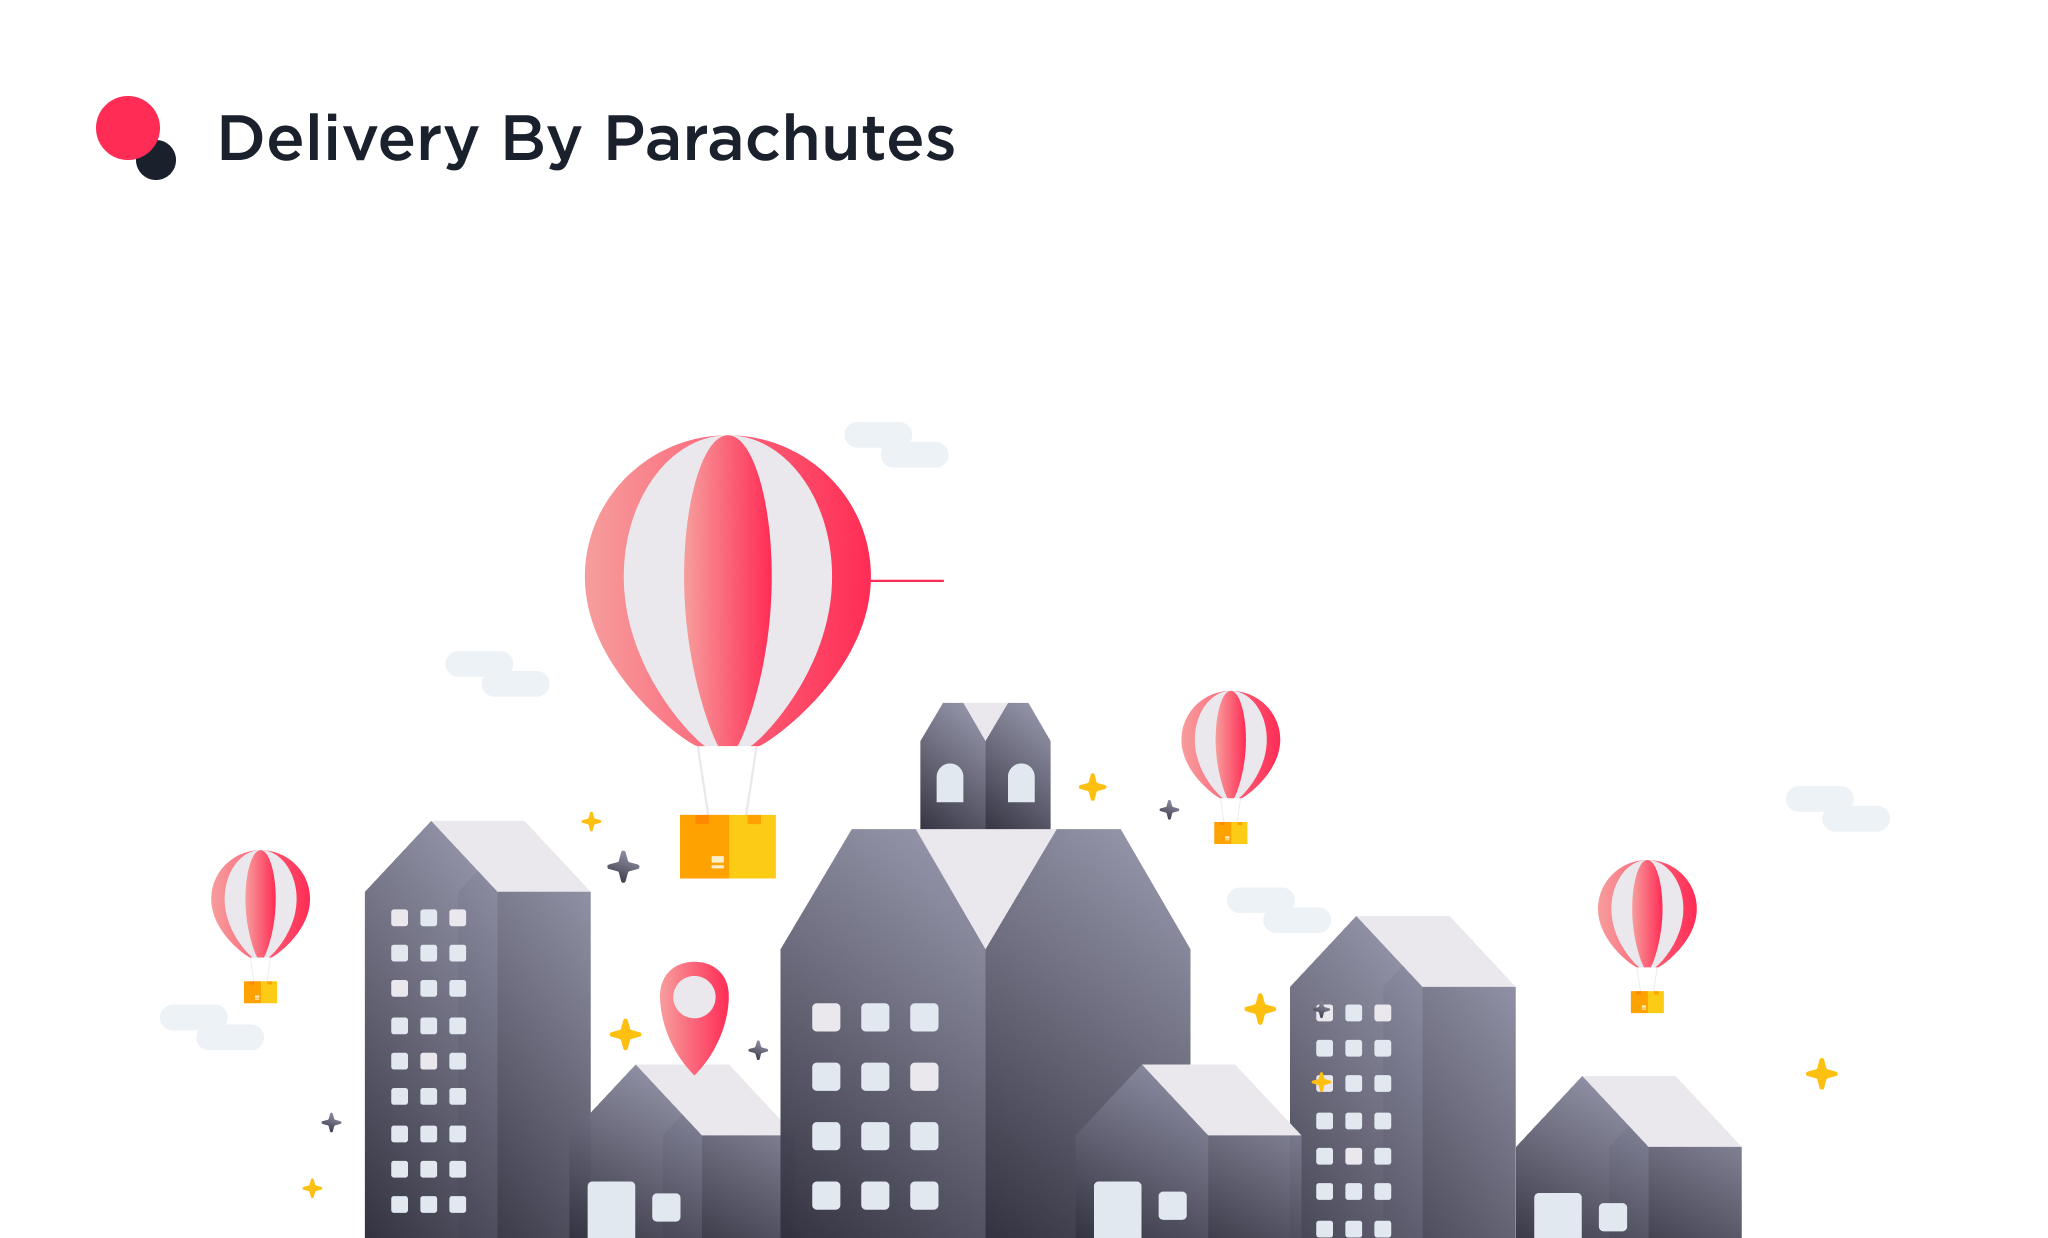 the image shows the food delivery by parachutes 